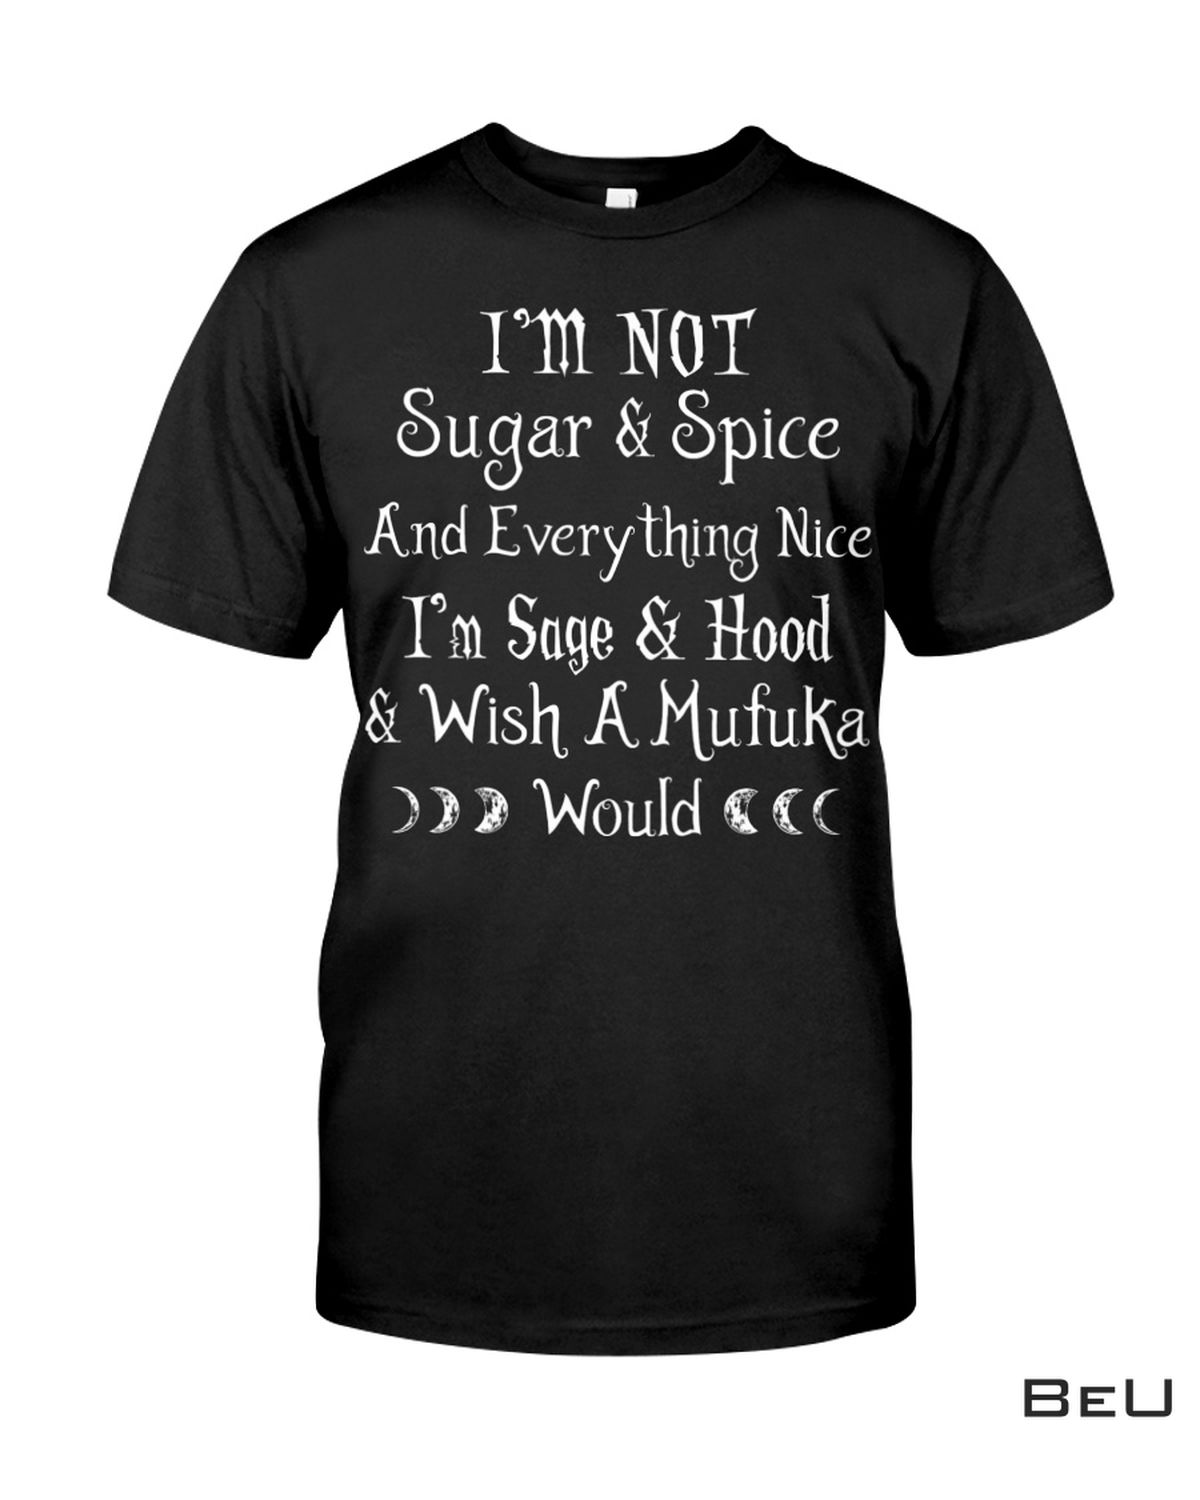 I Am Not Sugar And Spice And Everything Nice Shirt